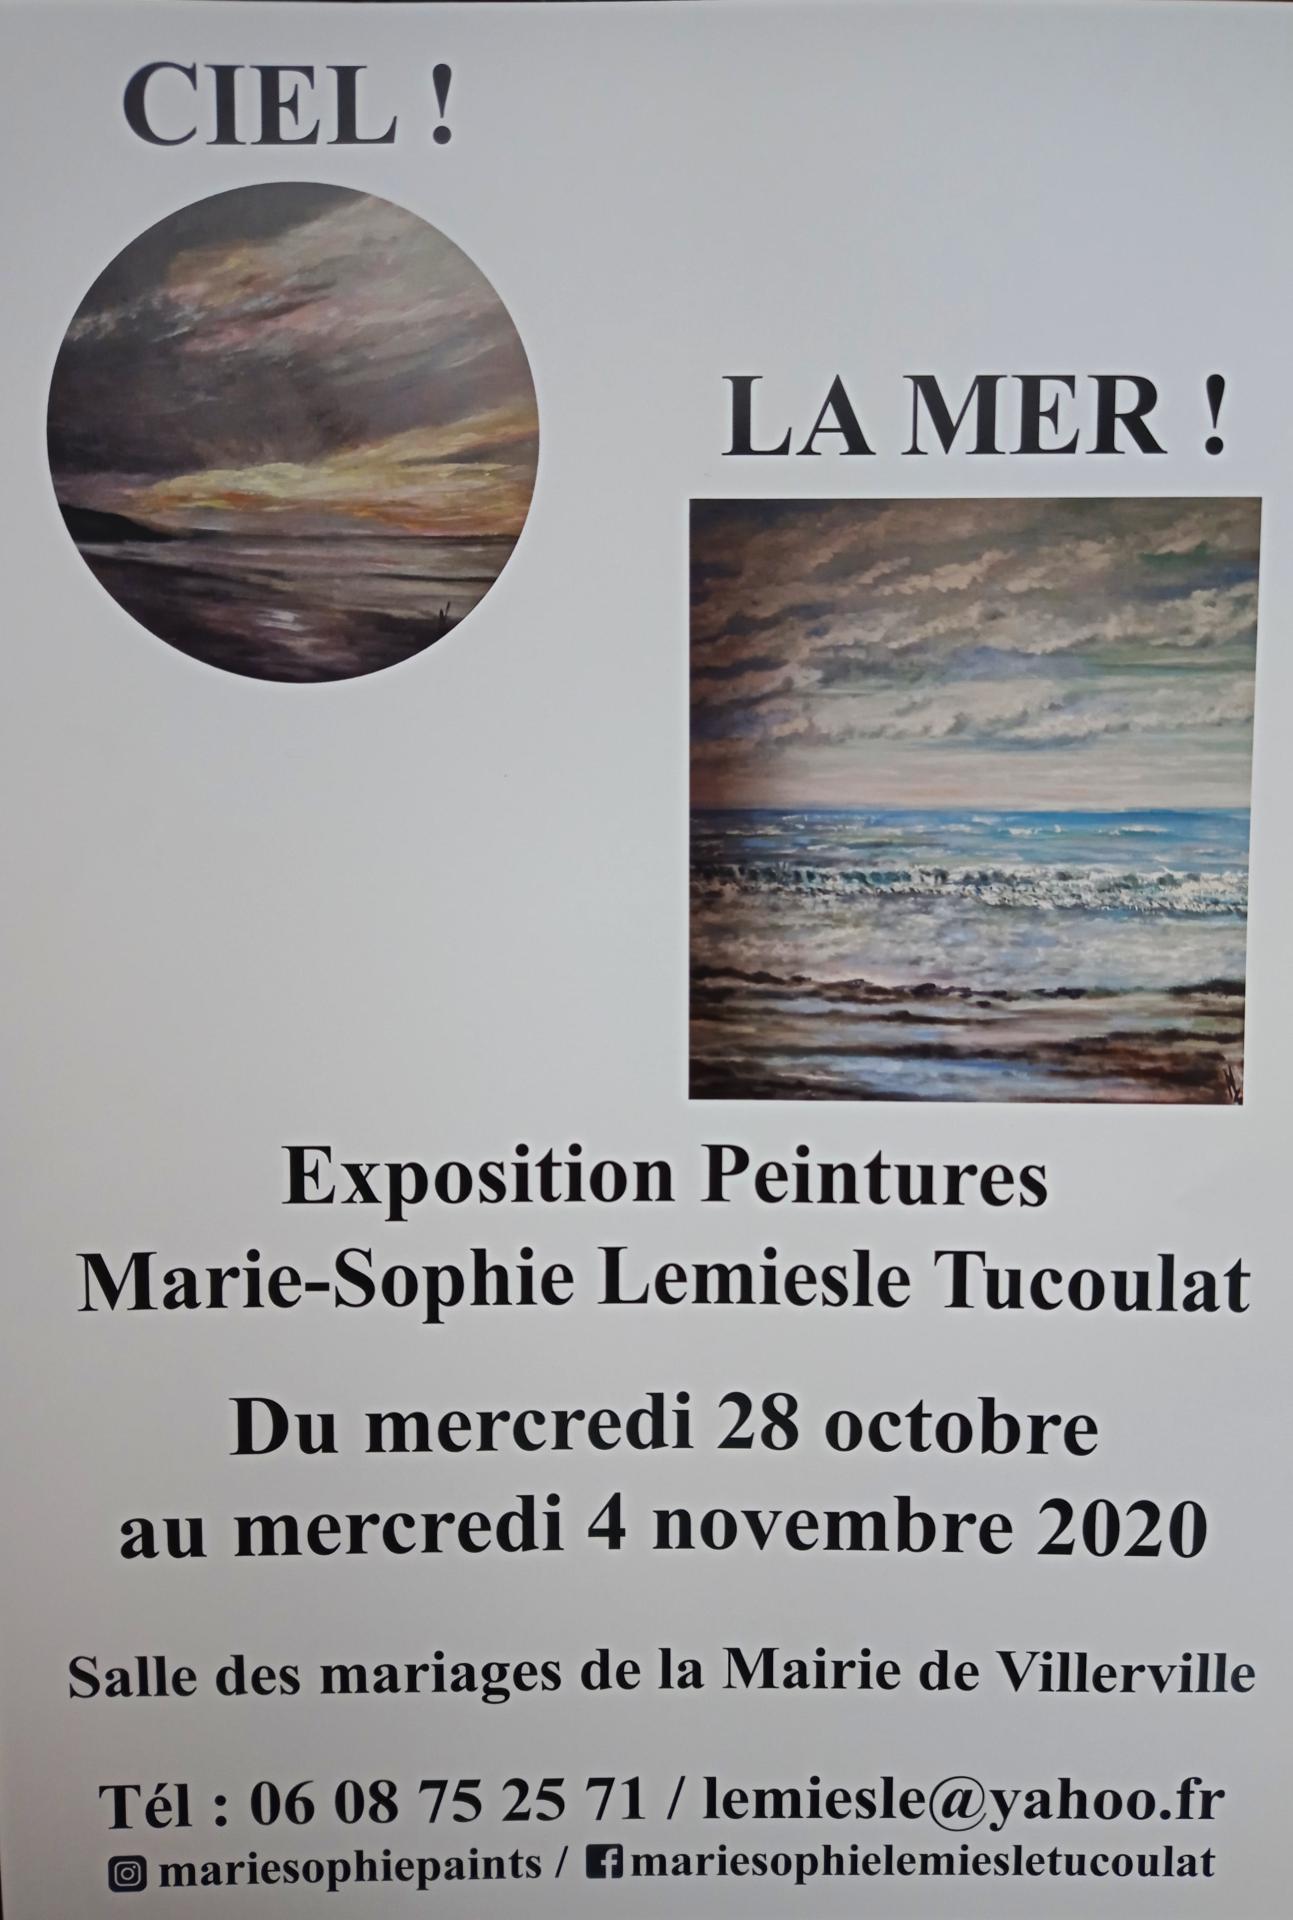 Expo mme tucoulat